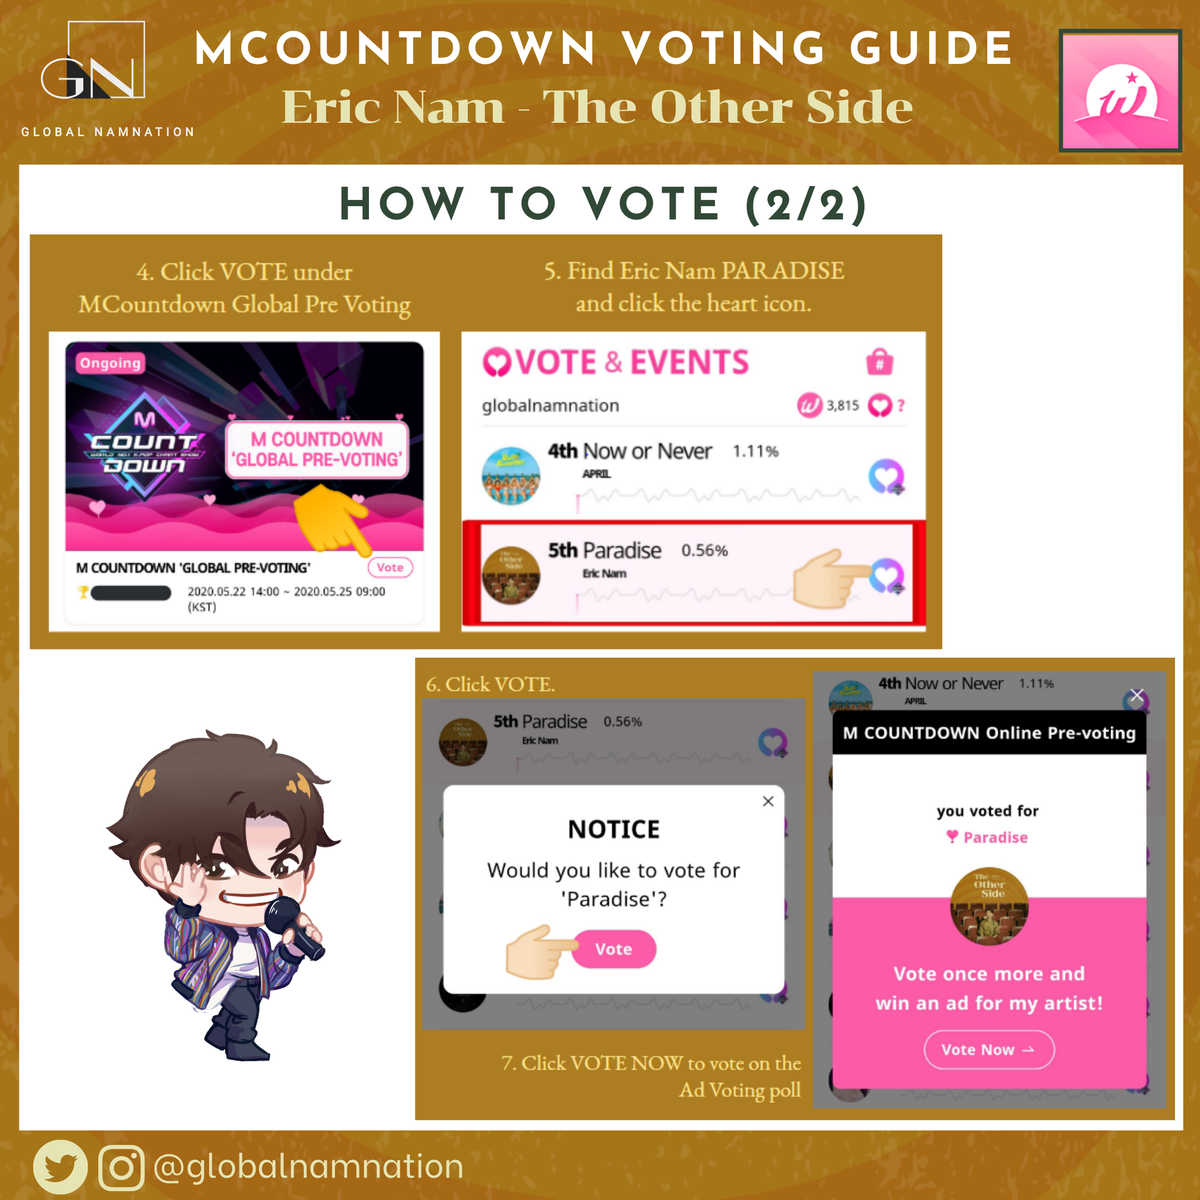 WHOSFAN   #VotingGuide (3/3) #EricNamScheduleEric Nam's Activities for July 31, 2020.Don't forget to vote Eric Nam on MWAVE and WHOSFAN for MNet Countdown. Please see separate guidelines.  #EricNam  #에릭남  #TheOtherSide  #ParadiseWithEricNam